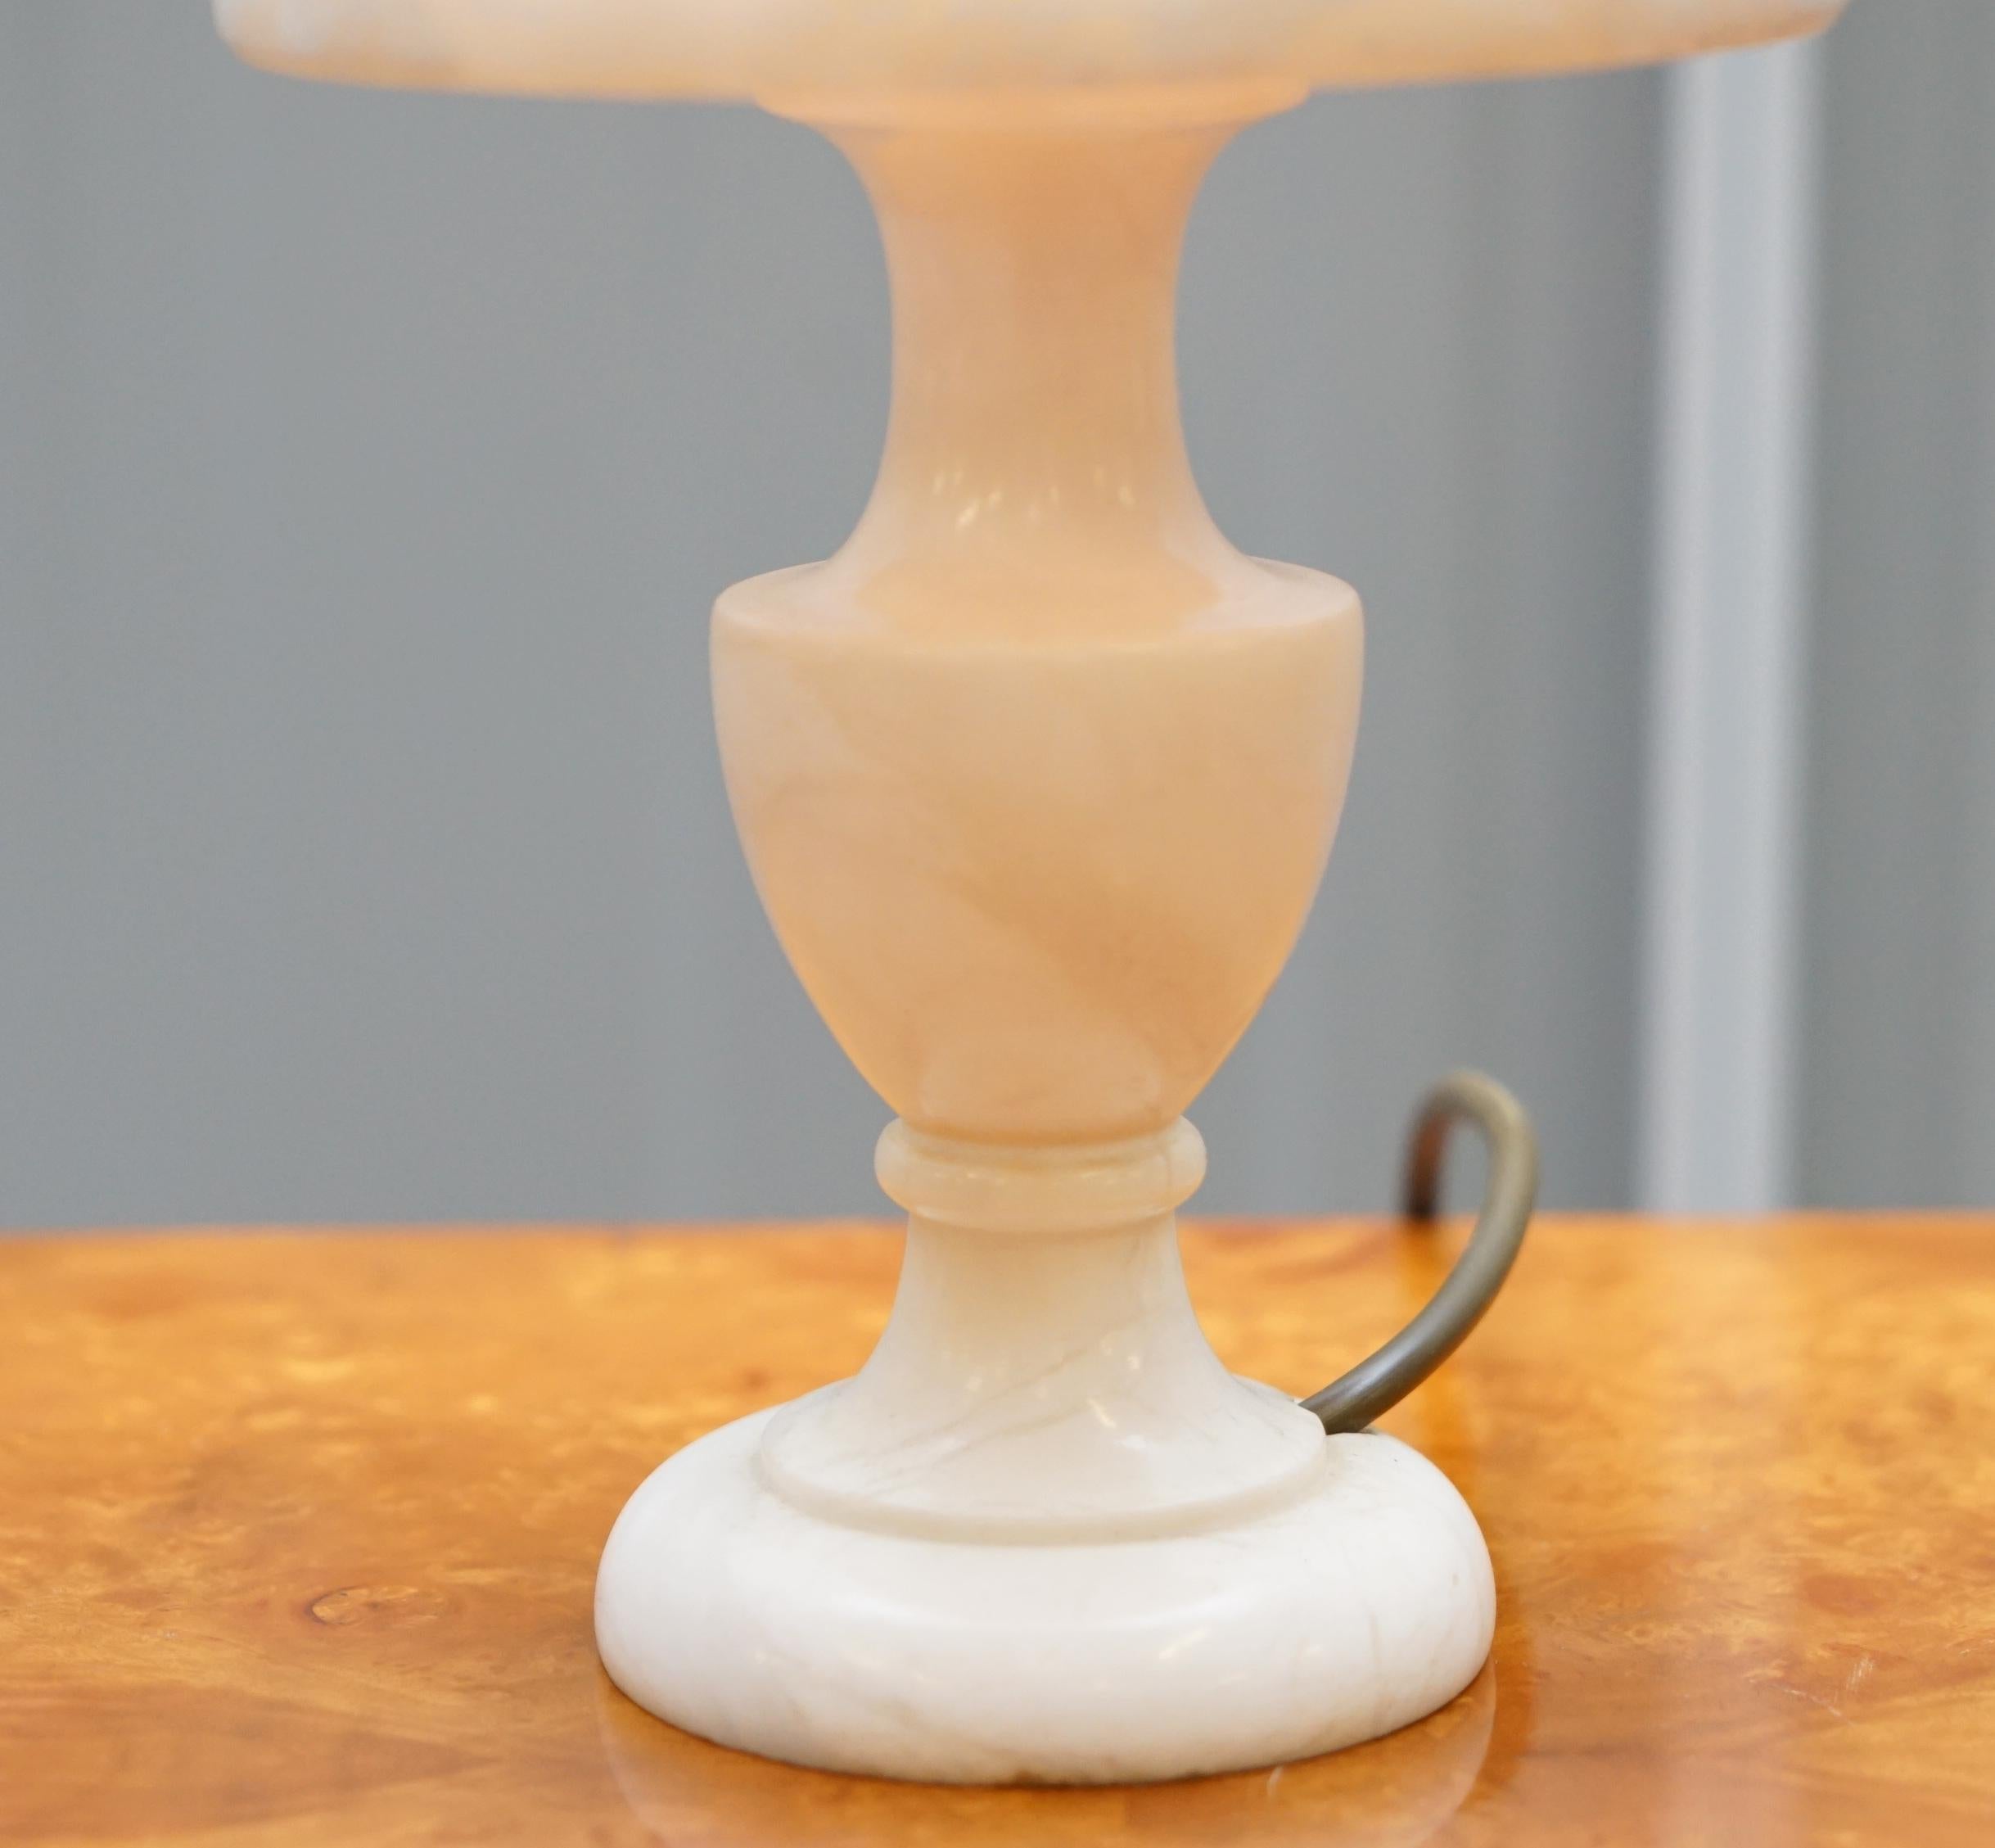 Edwardian Stunning Solid Veined Marble Lamp Including Marble Shade, circa 1900 English